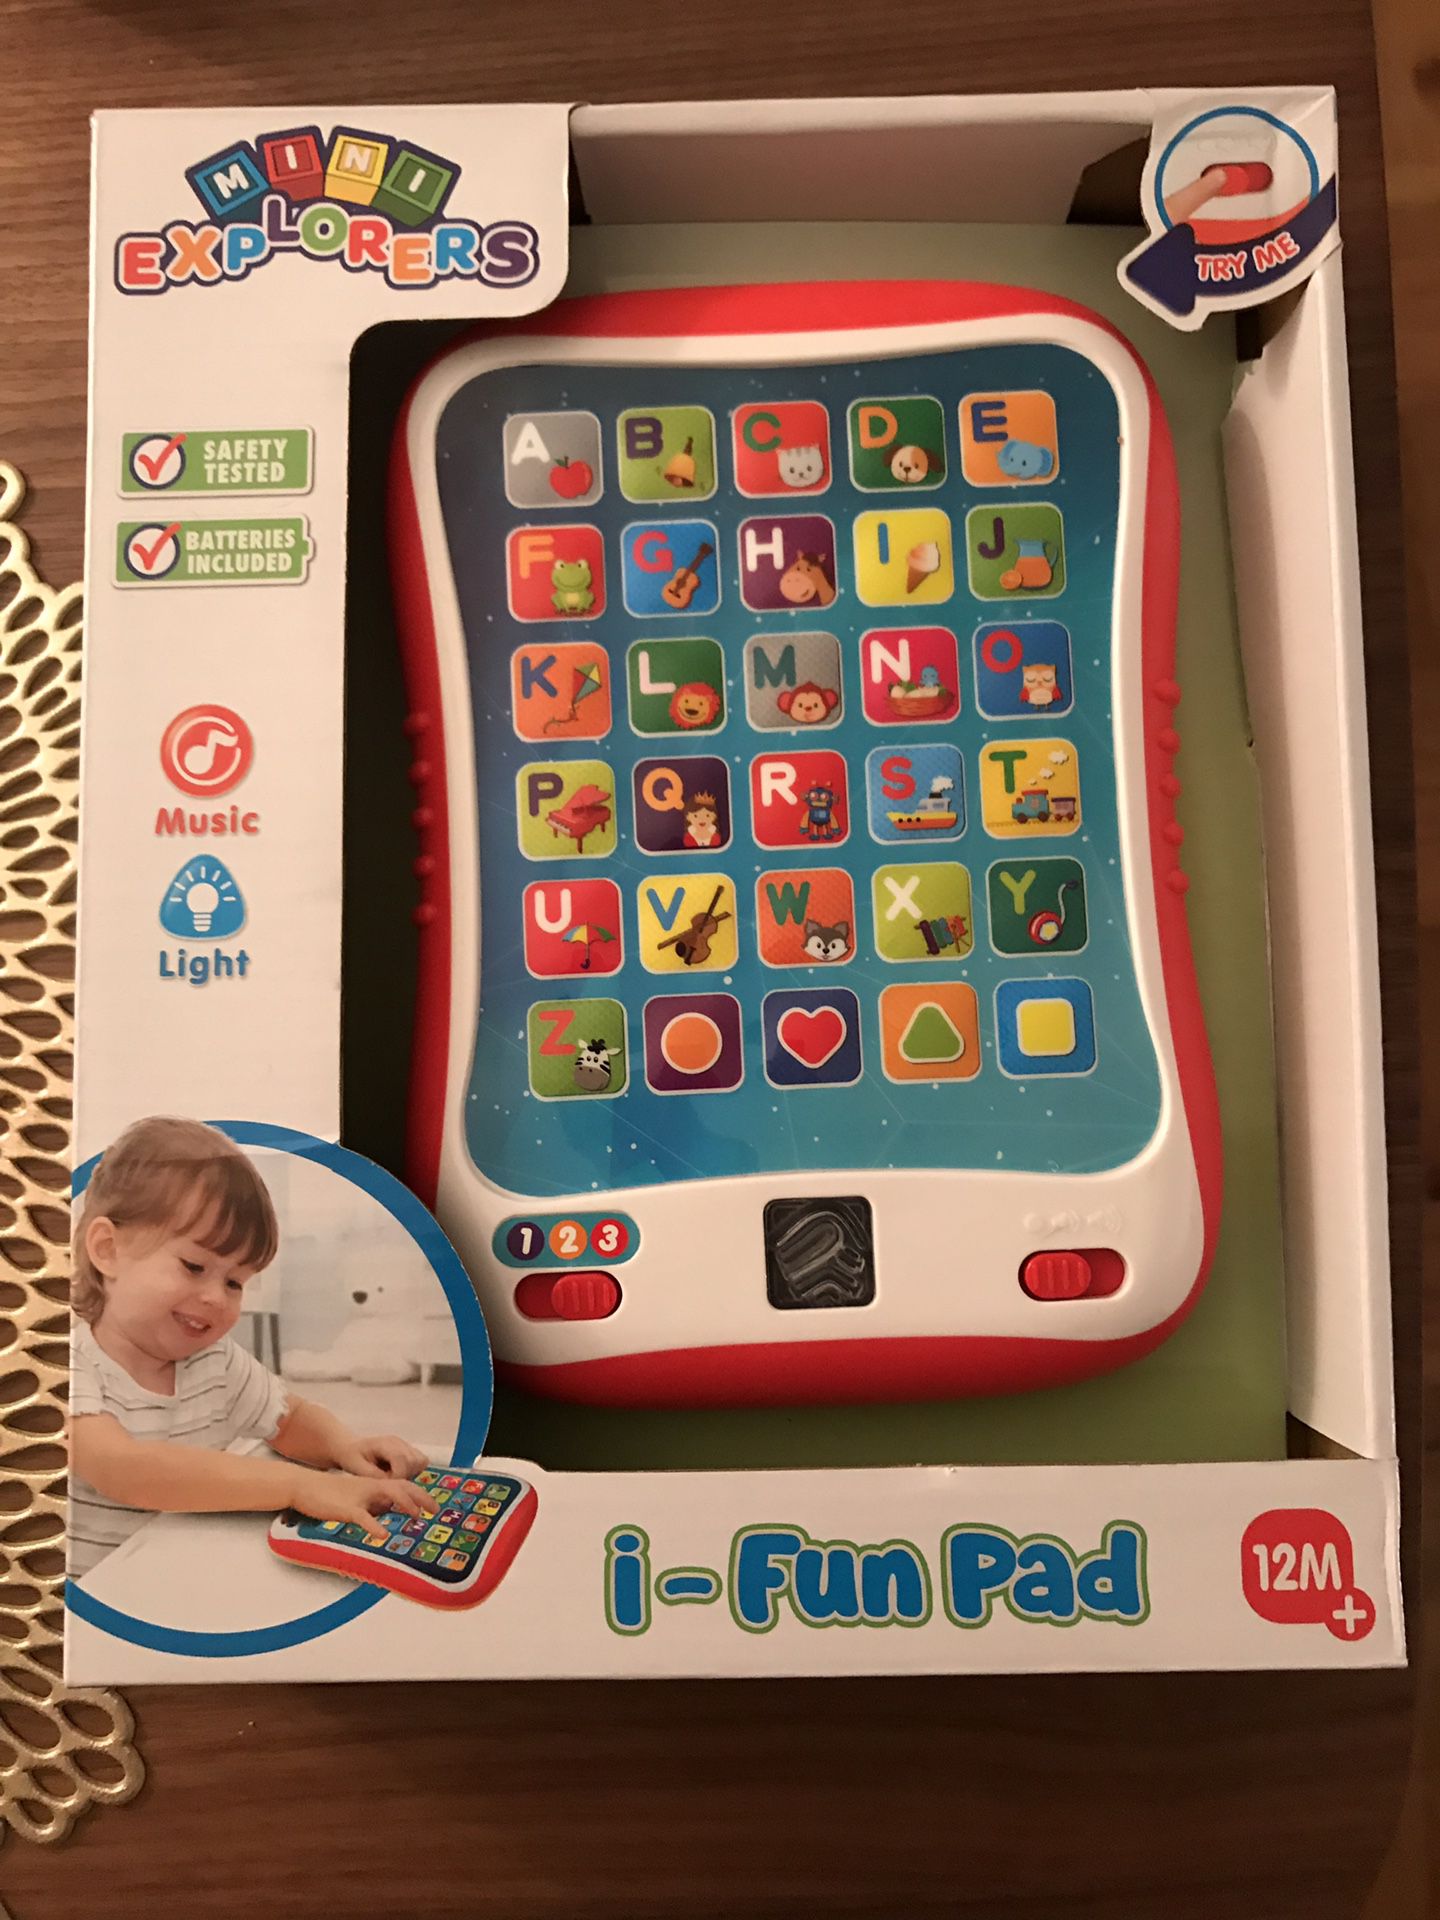 Kid’s toy tablet